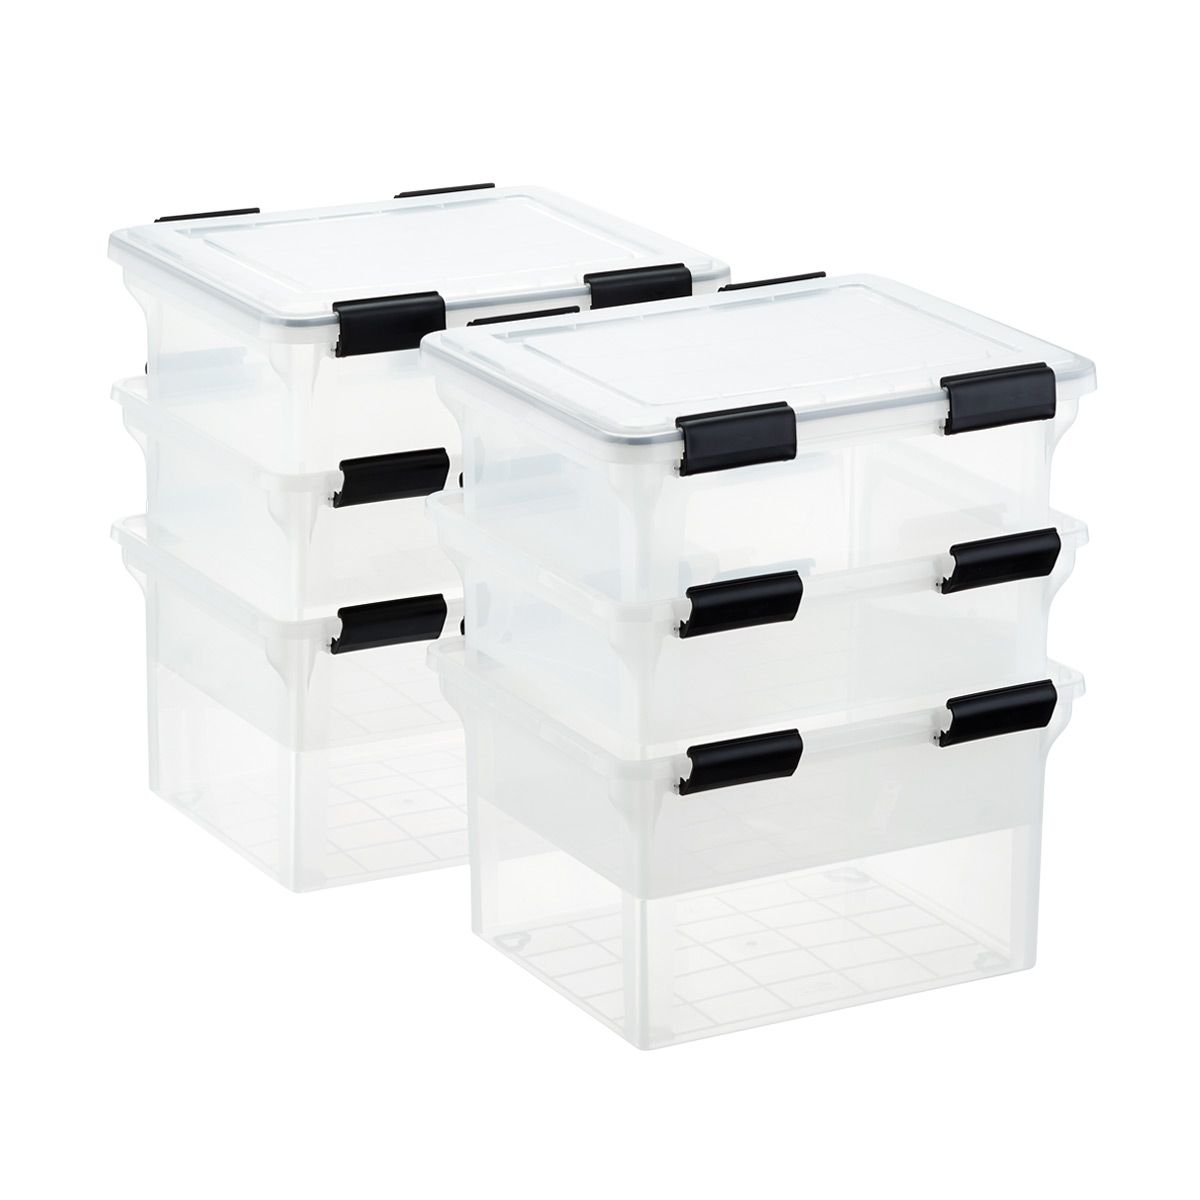 Watertight File Boxes | The Container Store